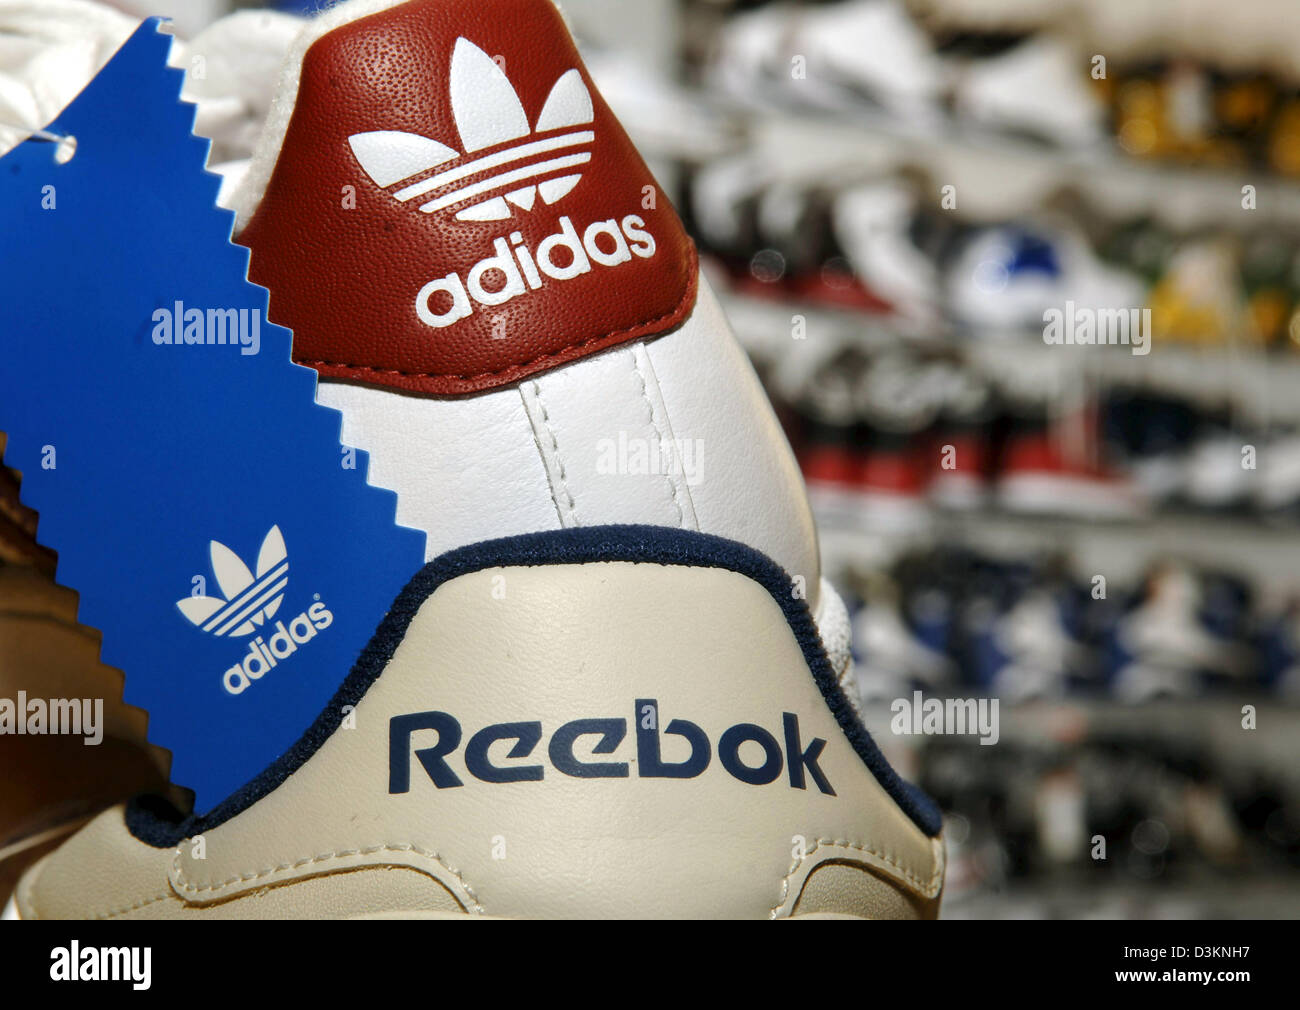 dpa) - The picture shows an Adidas sneaker on top of a Reebok sneaker in a  sporting goods store in Munich, Germany, Wednesday 03 August 2005. In order  to bridge the gap